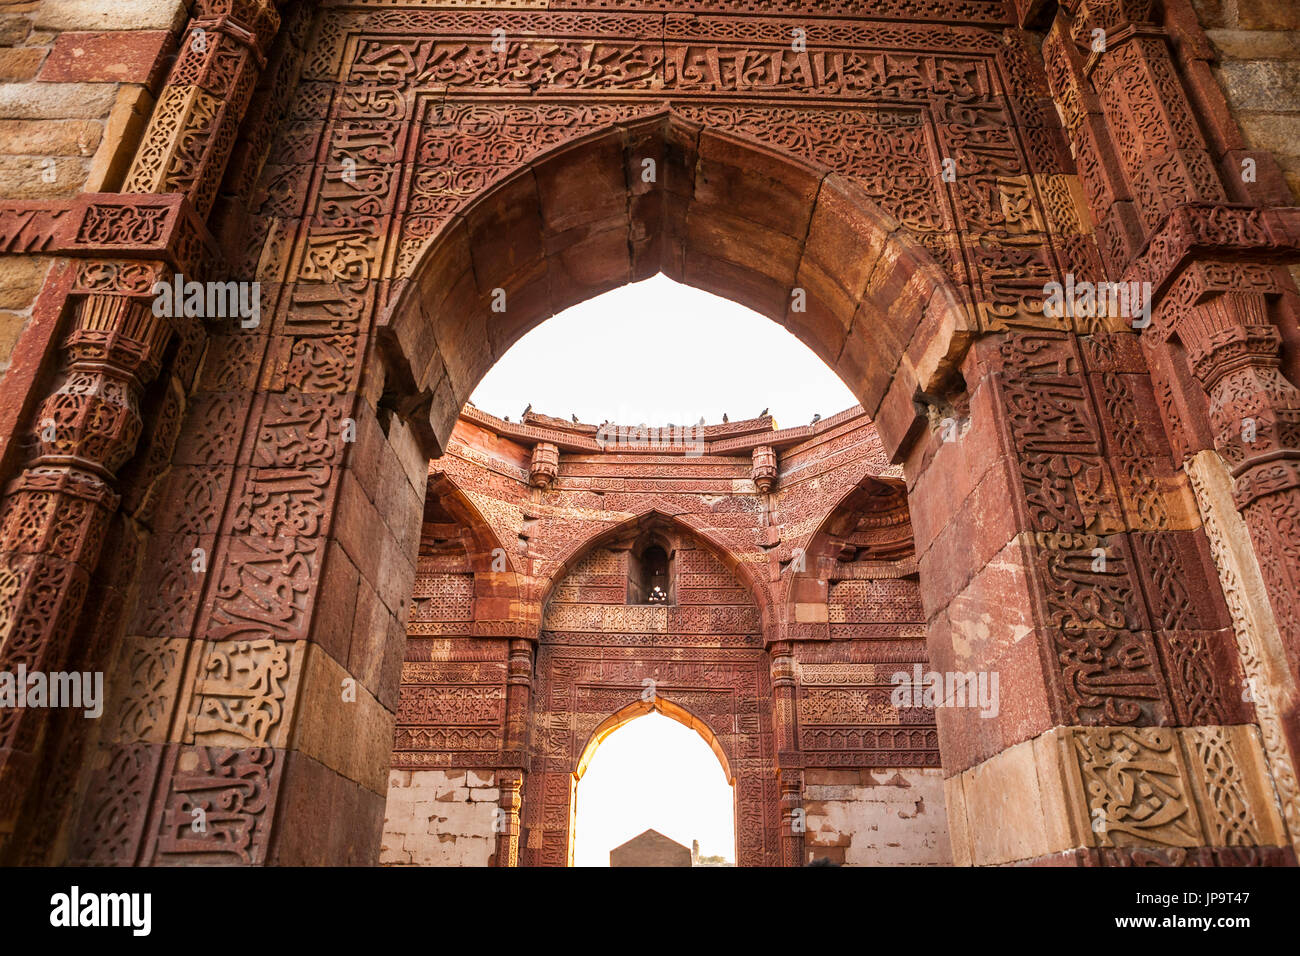 The carved stone arches and walls of the ruins at Qutb Complex in Delhi, India. Stock Photo